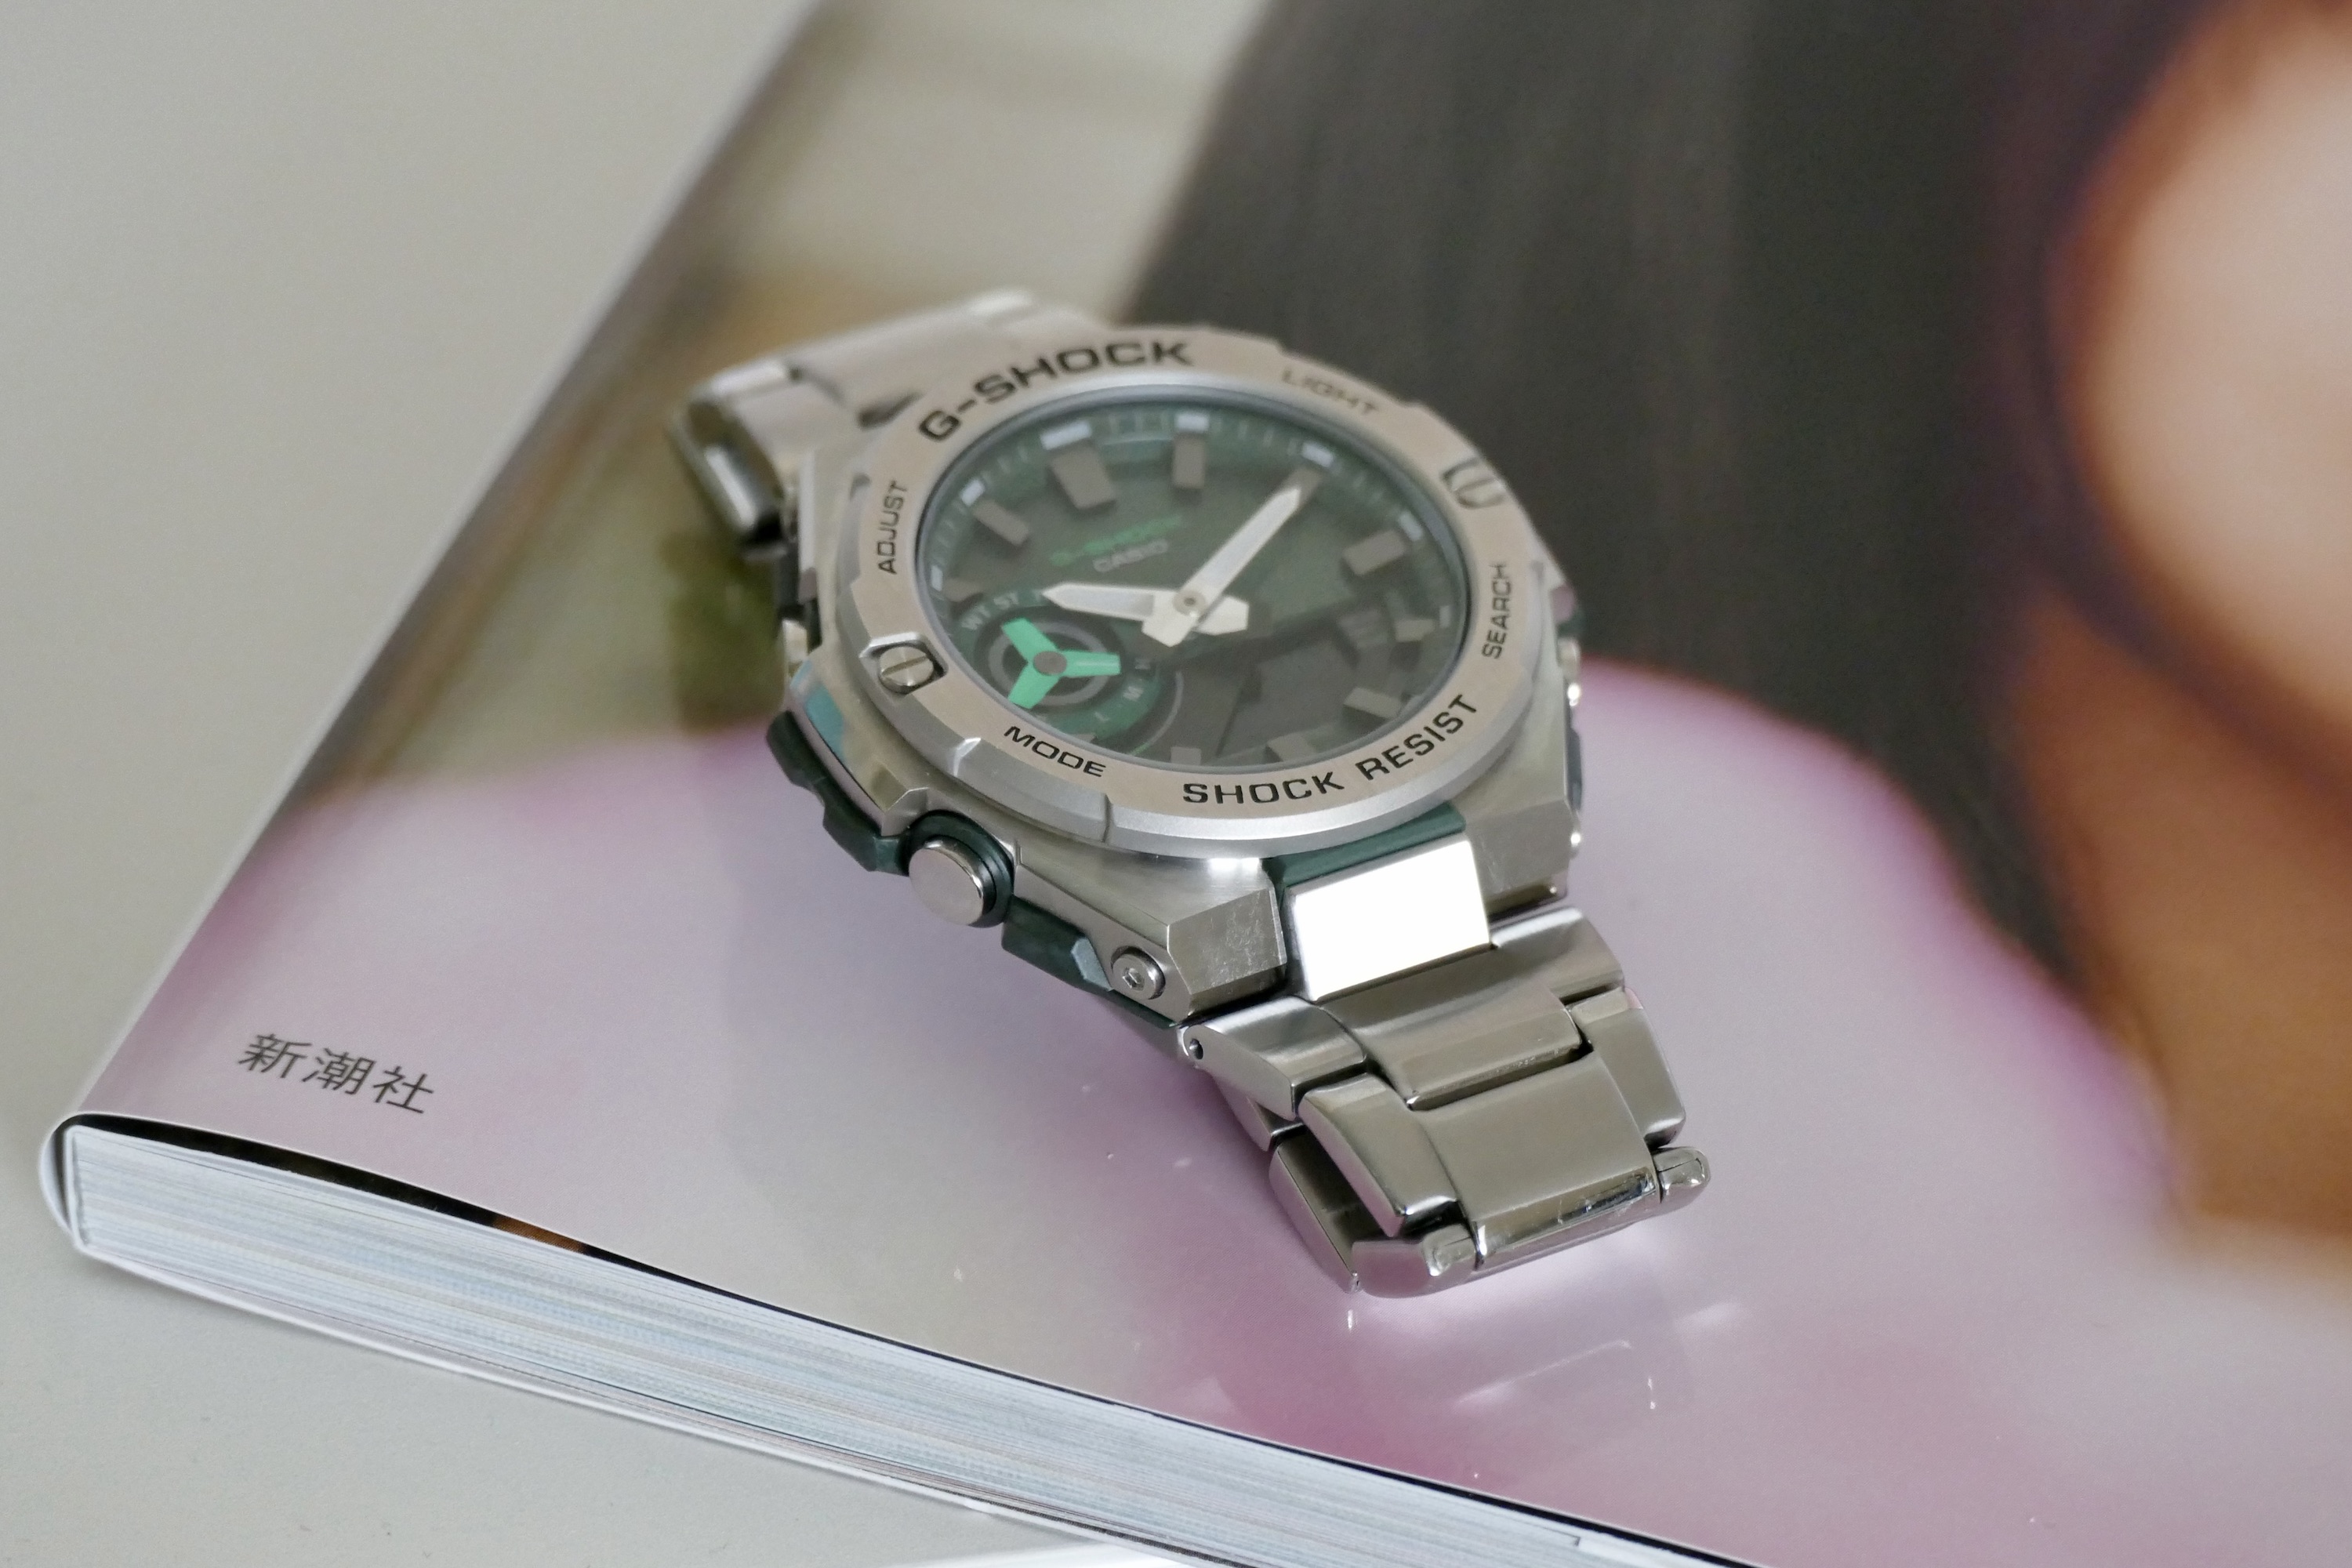 Casio G-Shock GST-B500 showing the green dial and bracelet.